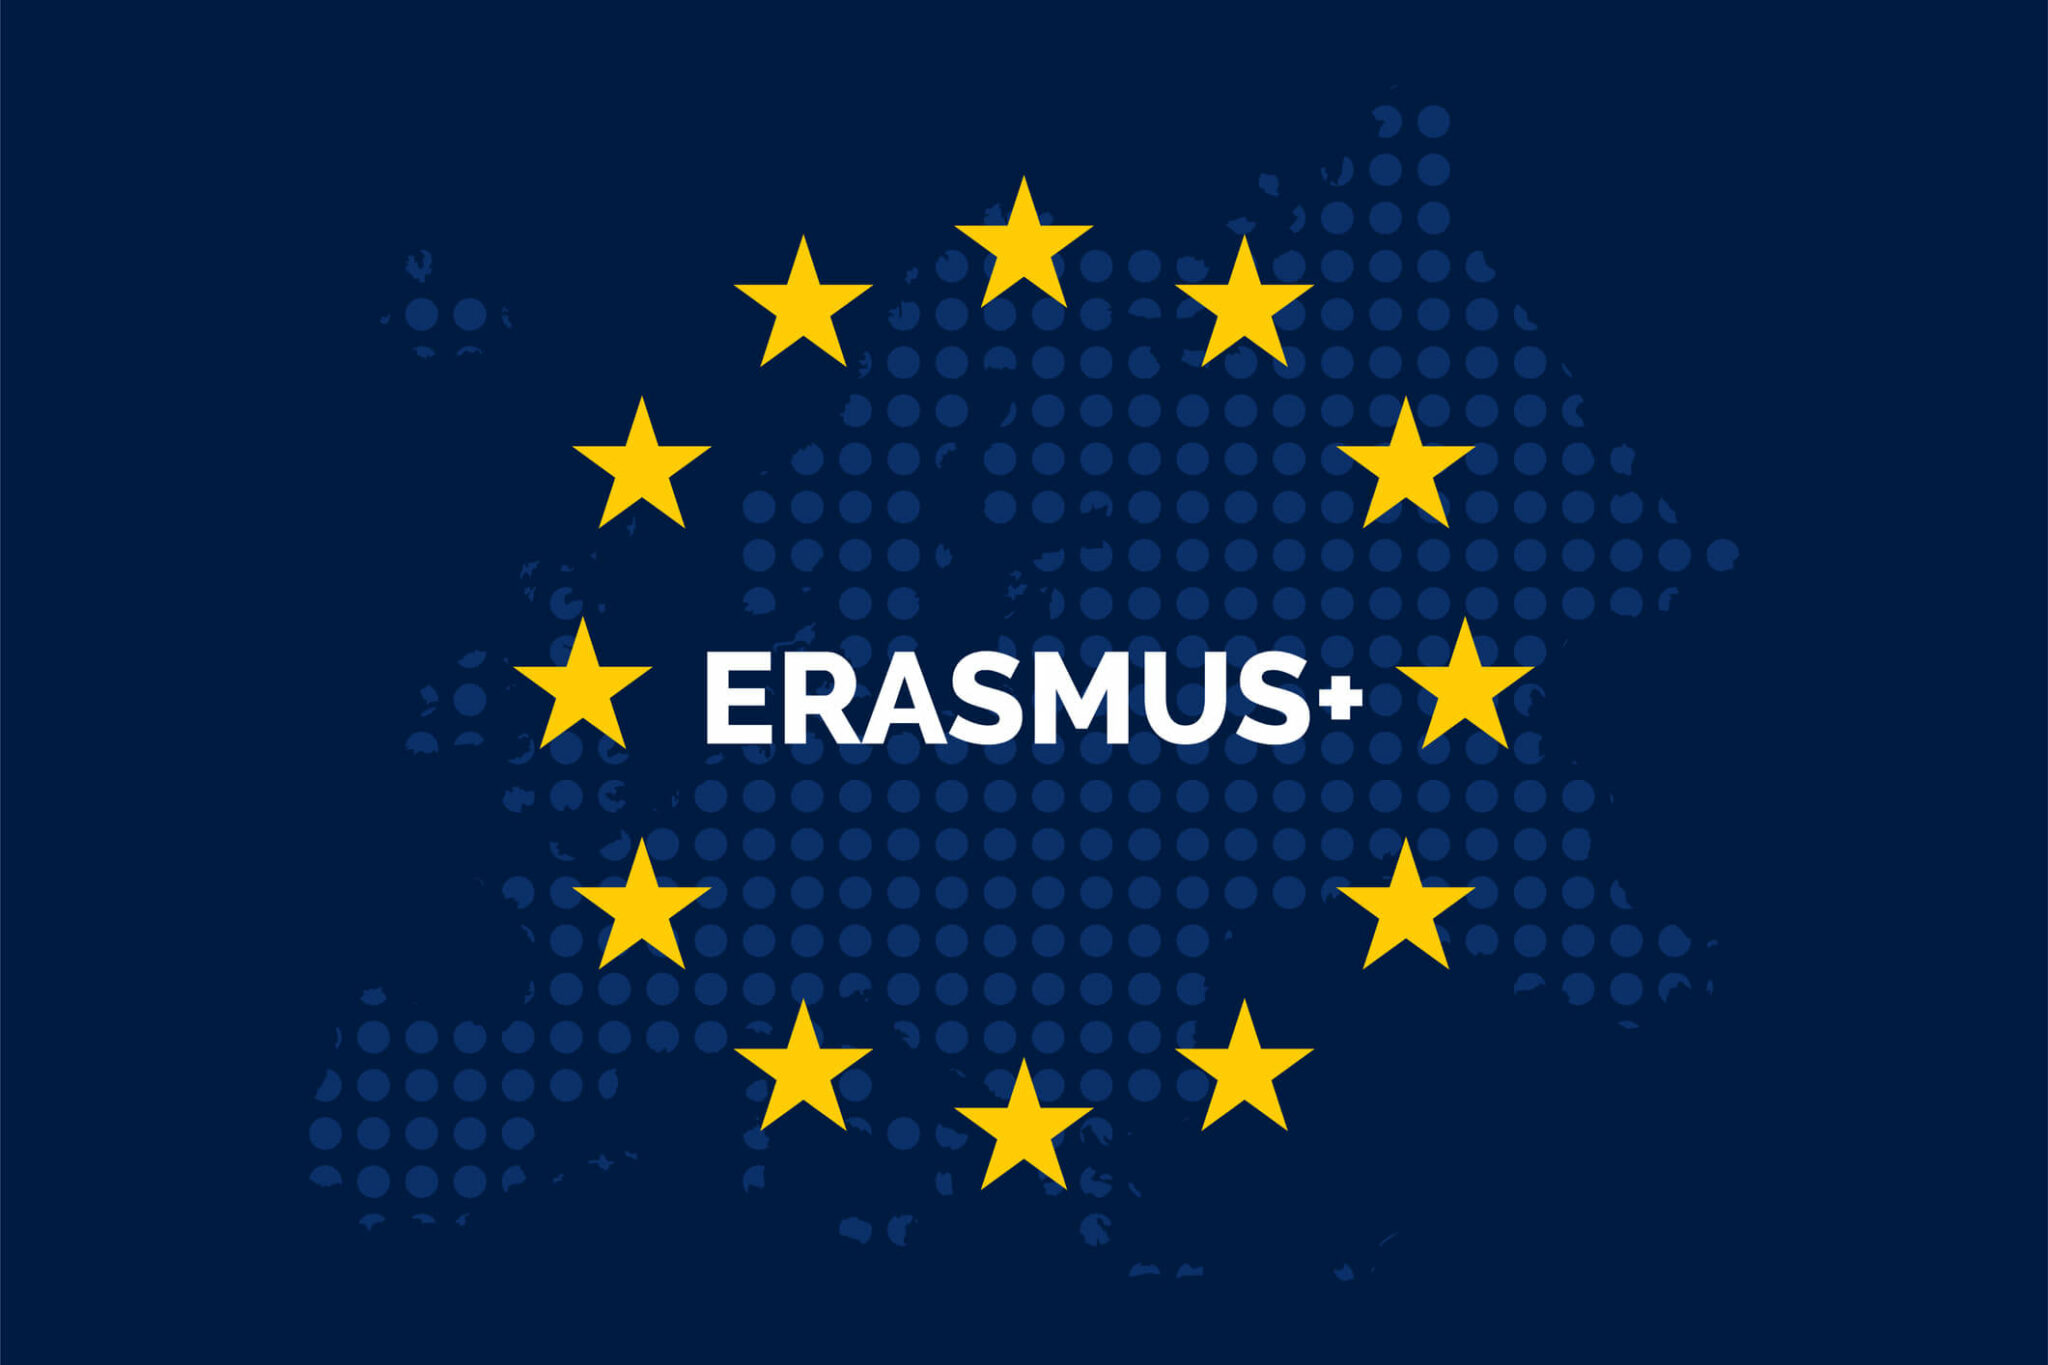 EXPLORE THE "HOW TO: ERASMUS+" E-LEARNING COURSE